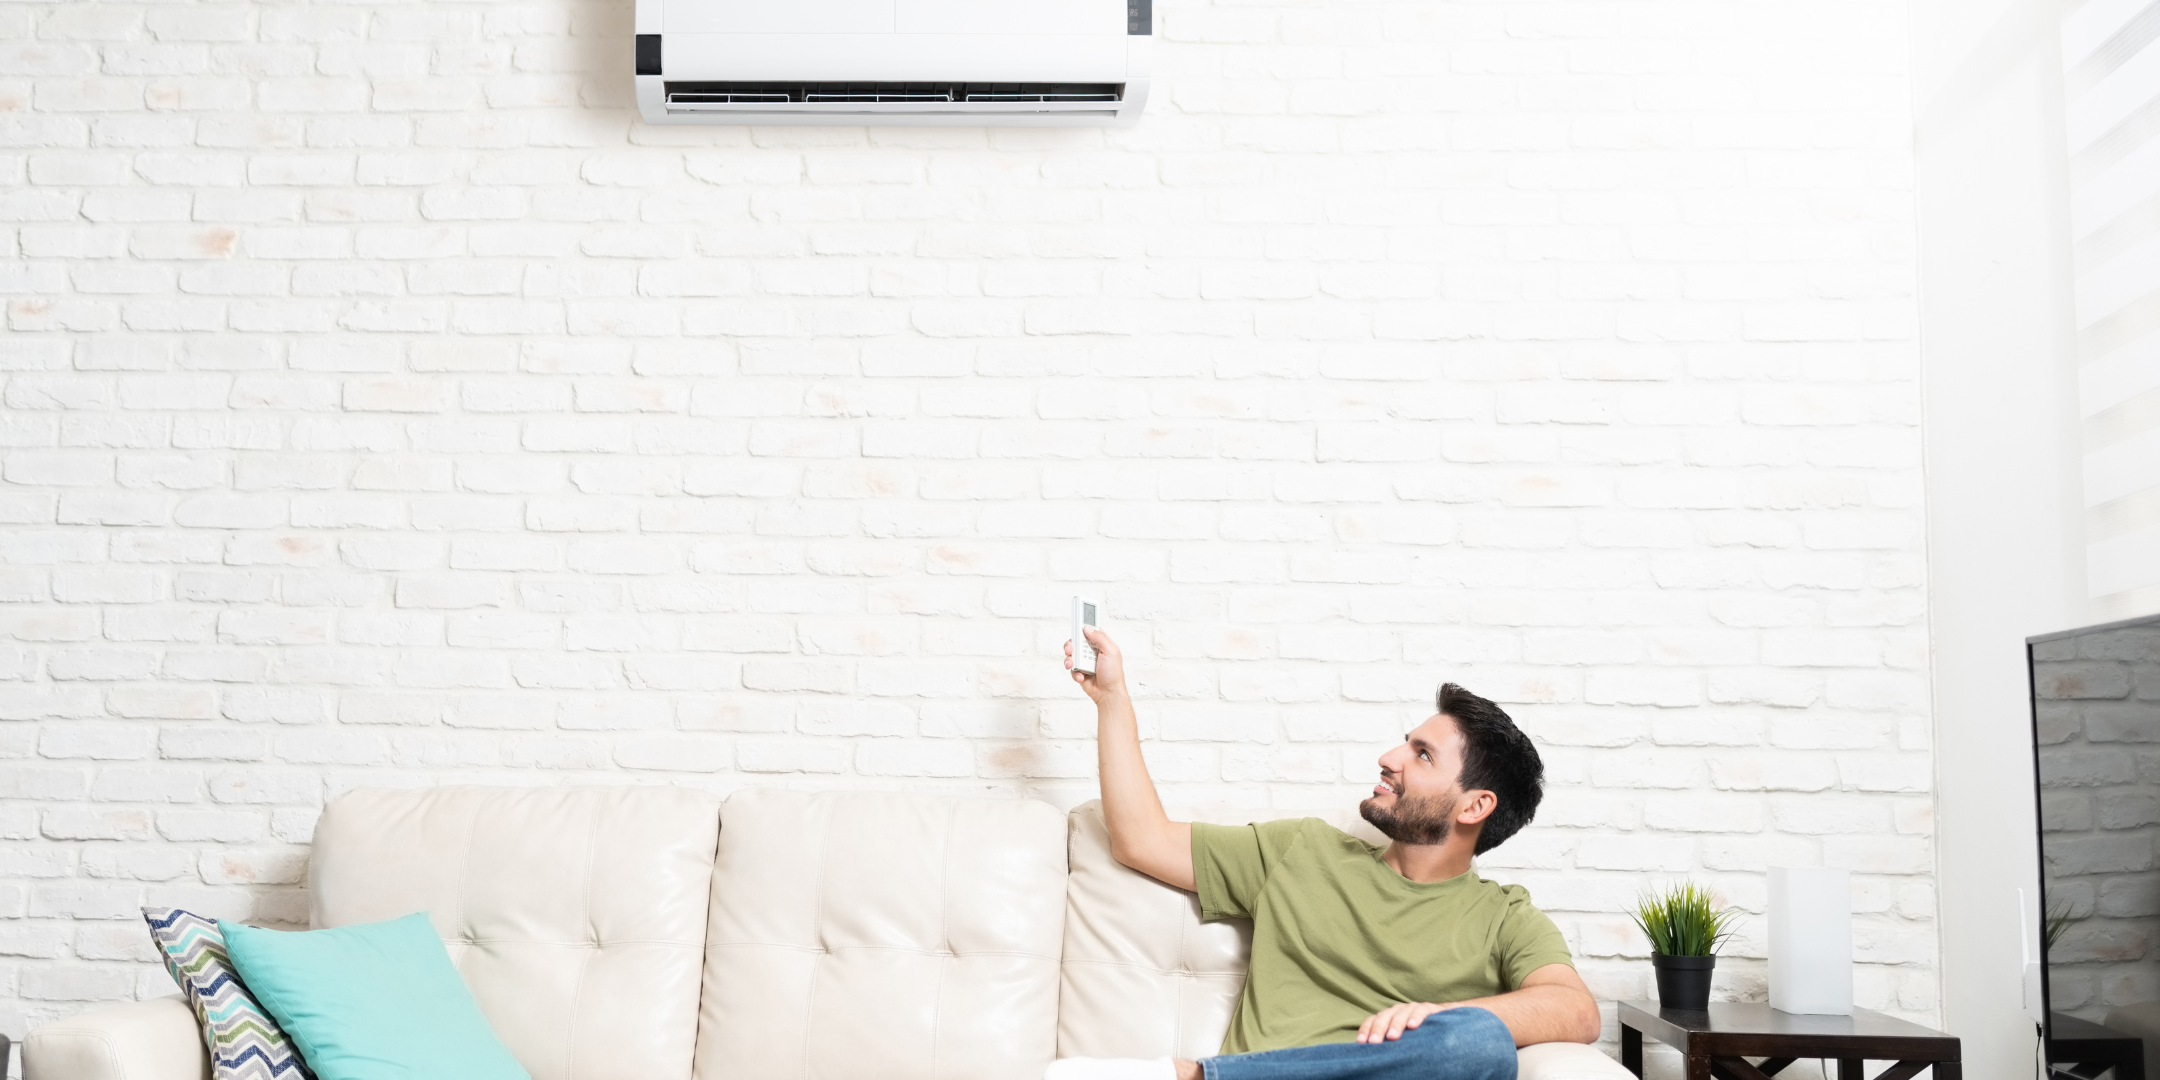 Man adjusting temperature on an HVAC mini-split while sitting on the couch, showing how easy total temperature control is. 